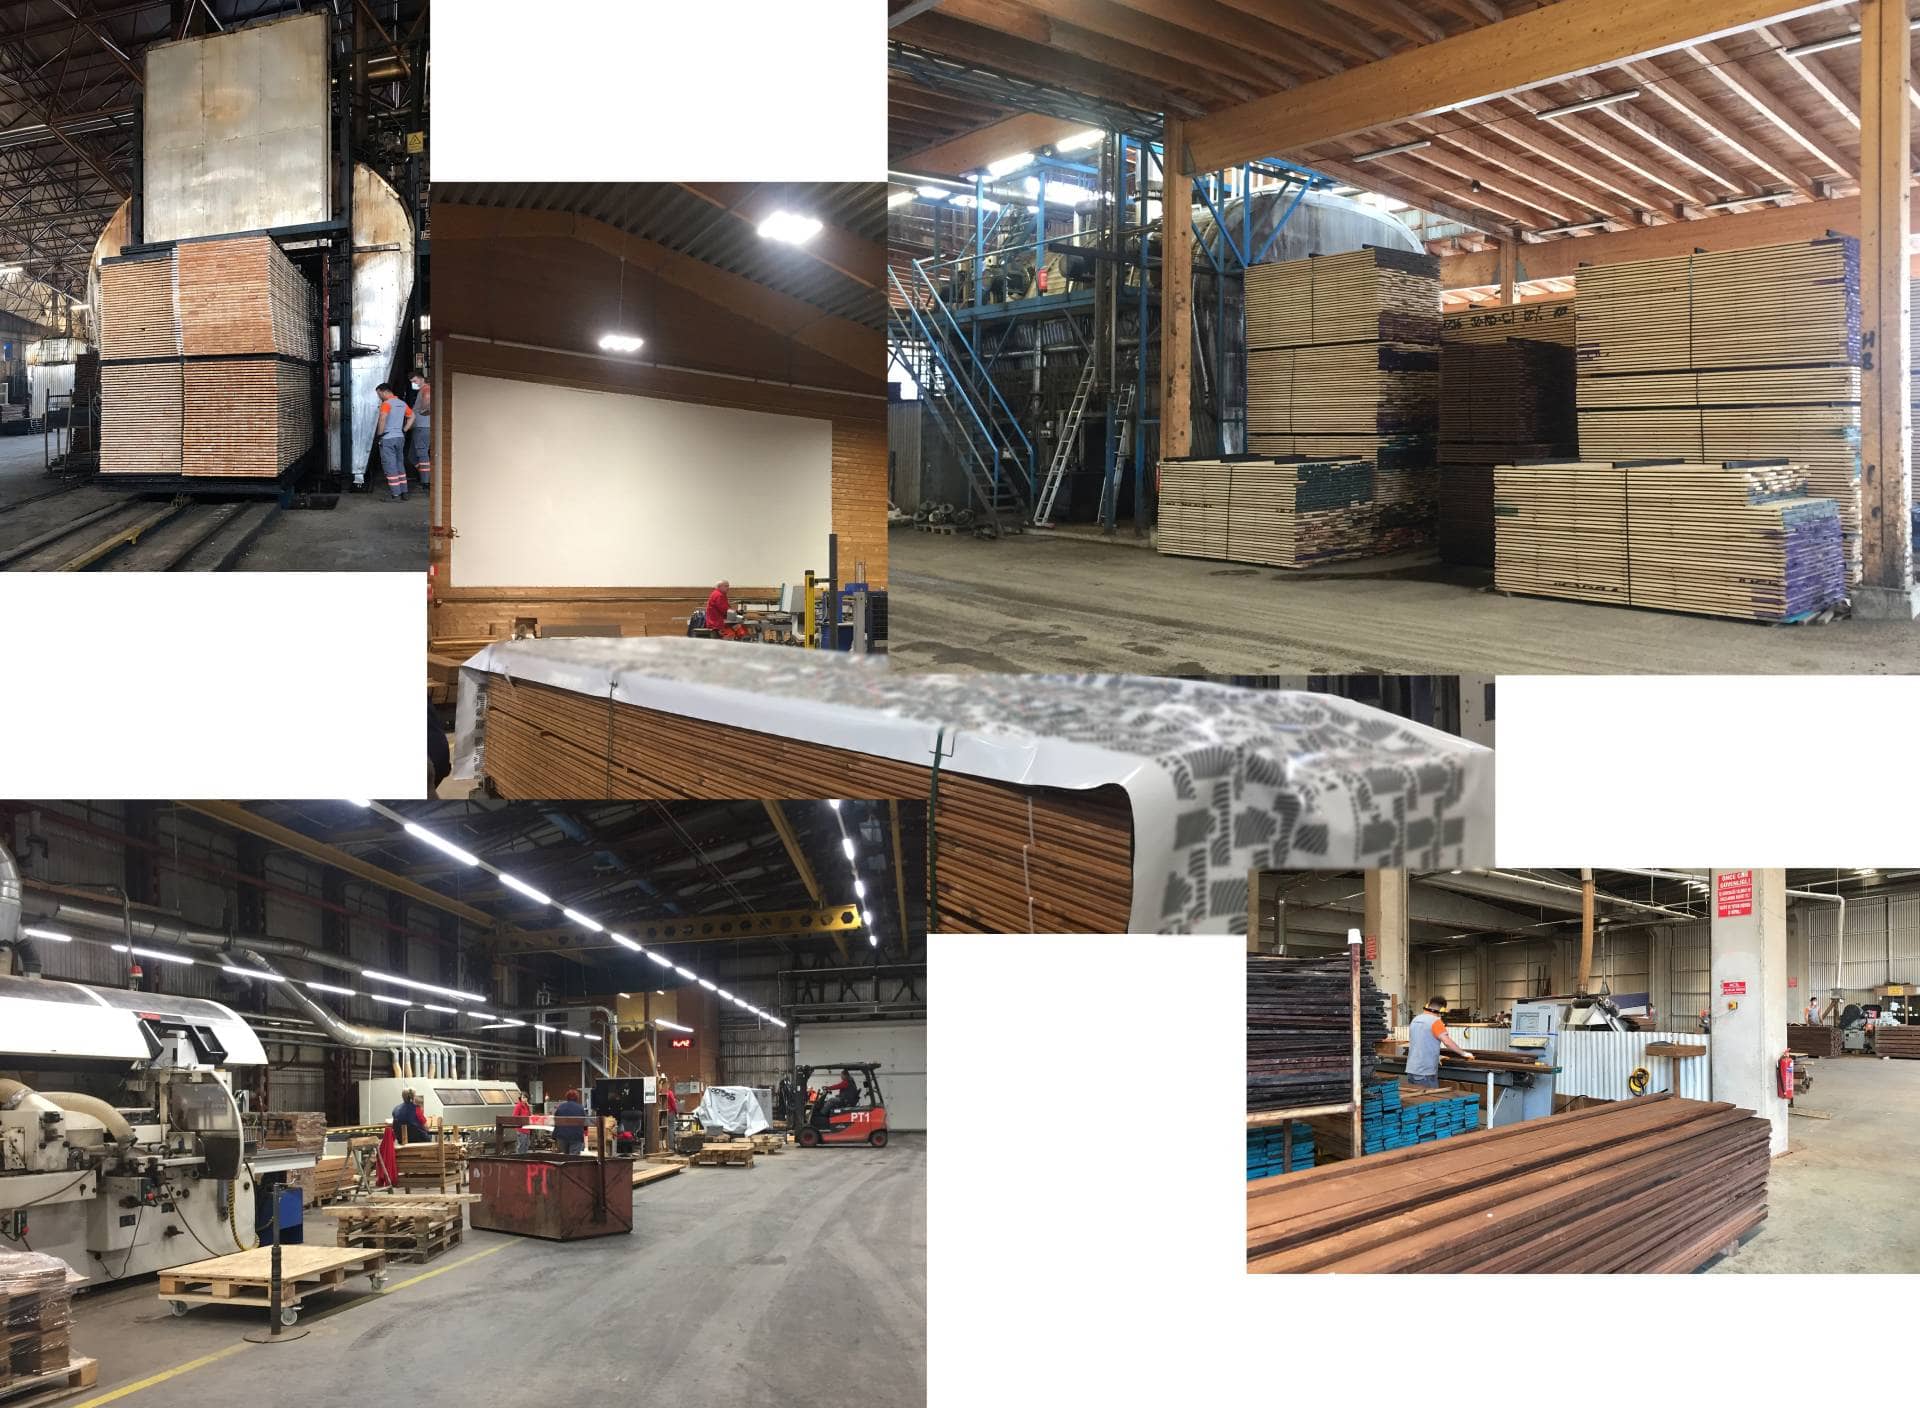 Choice of wood in warehouses